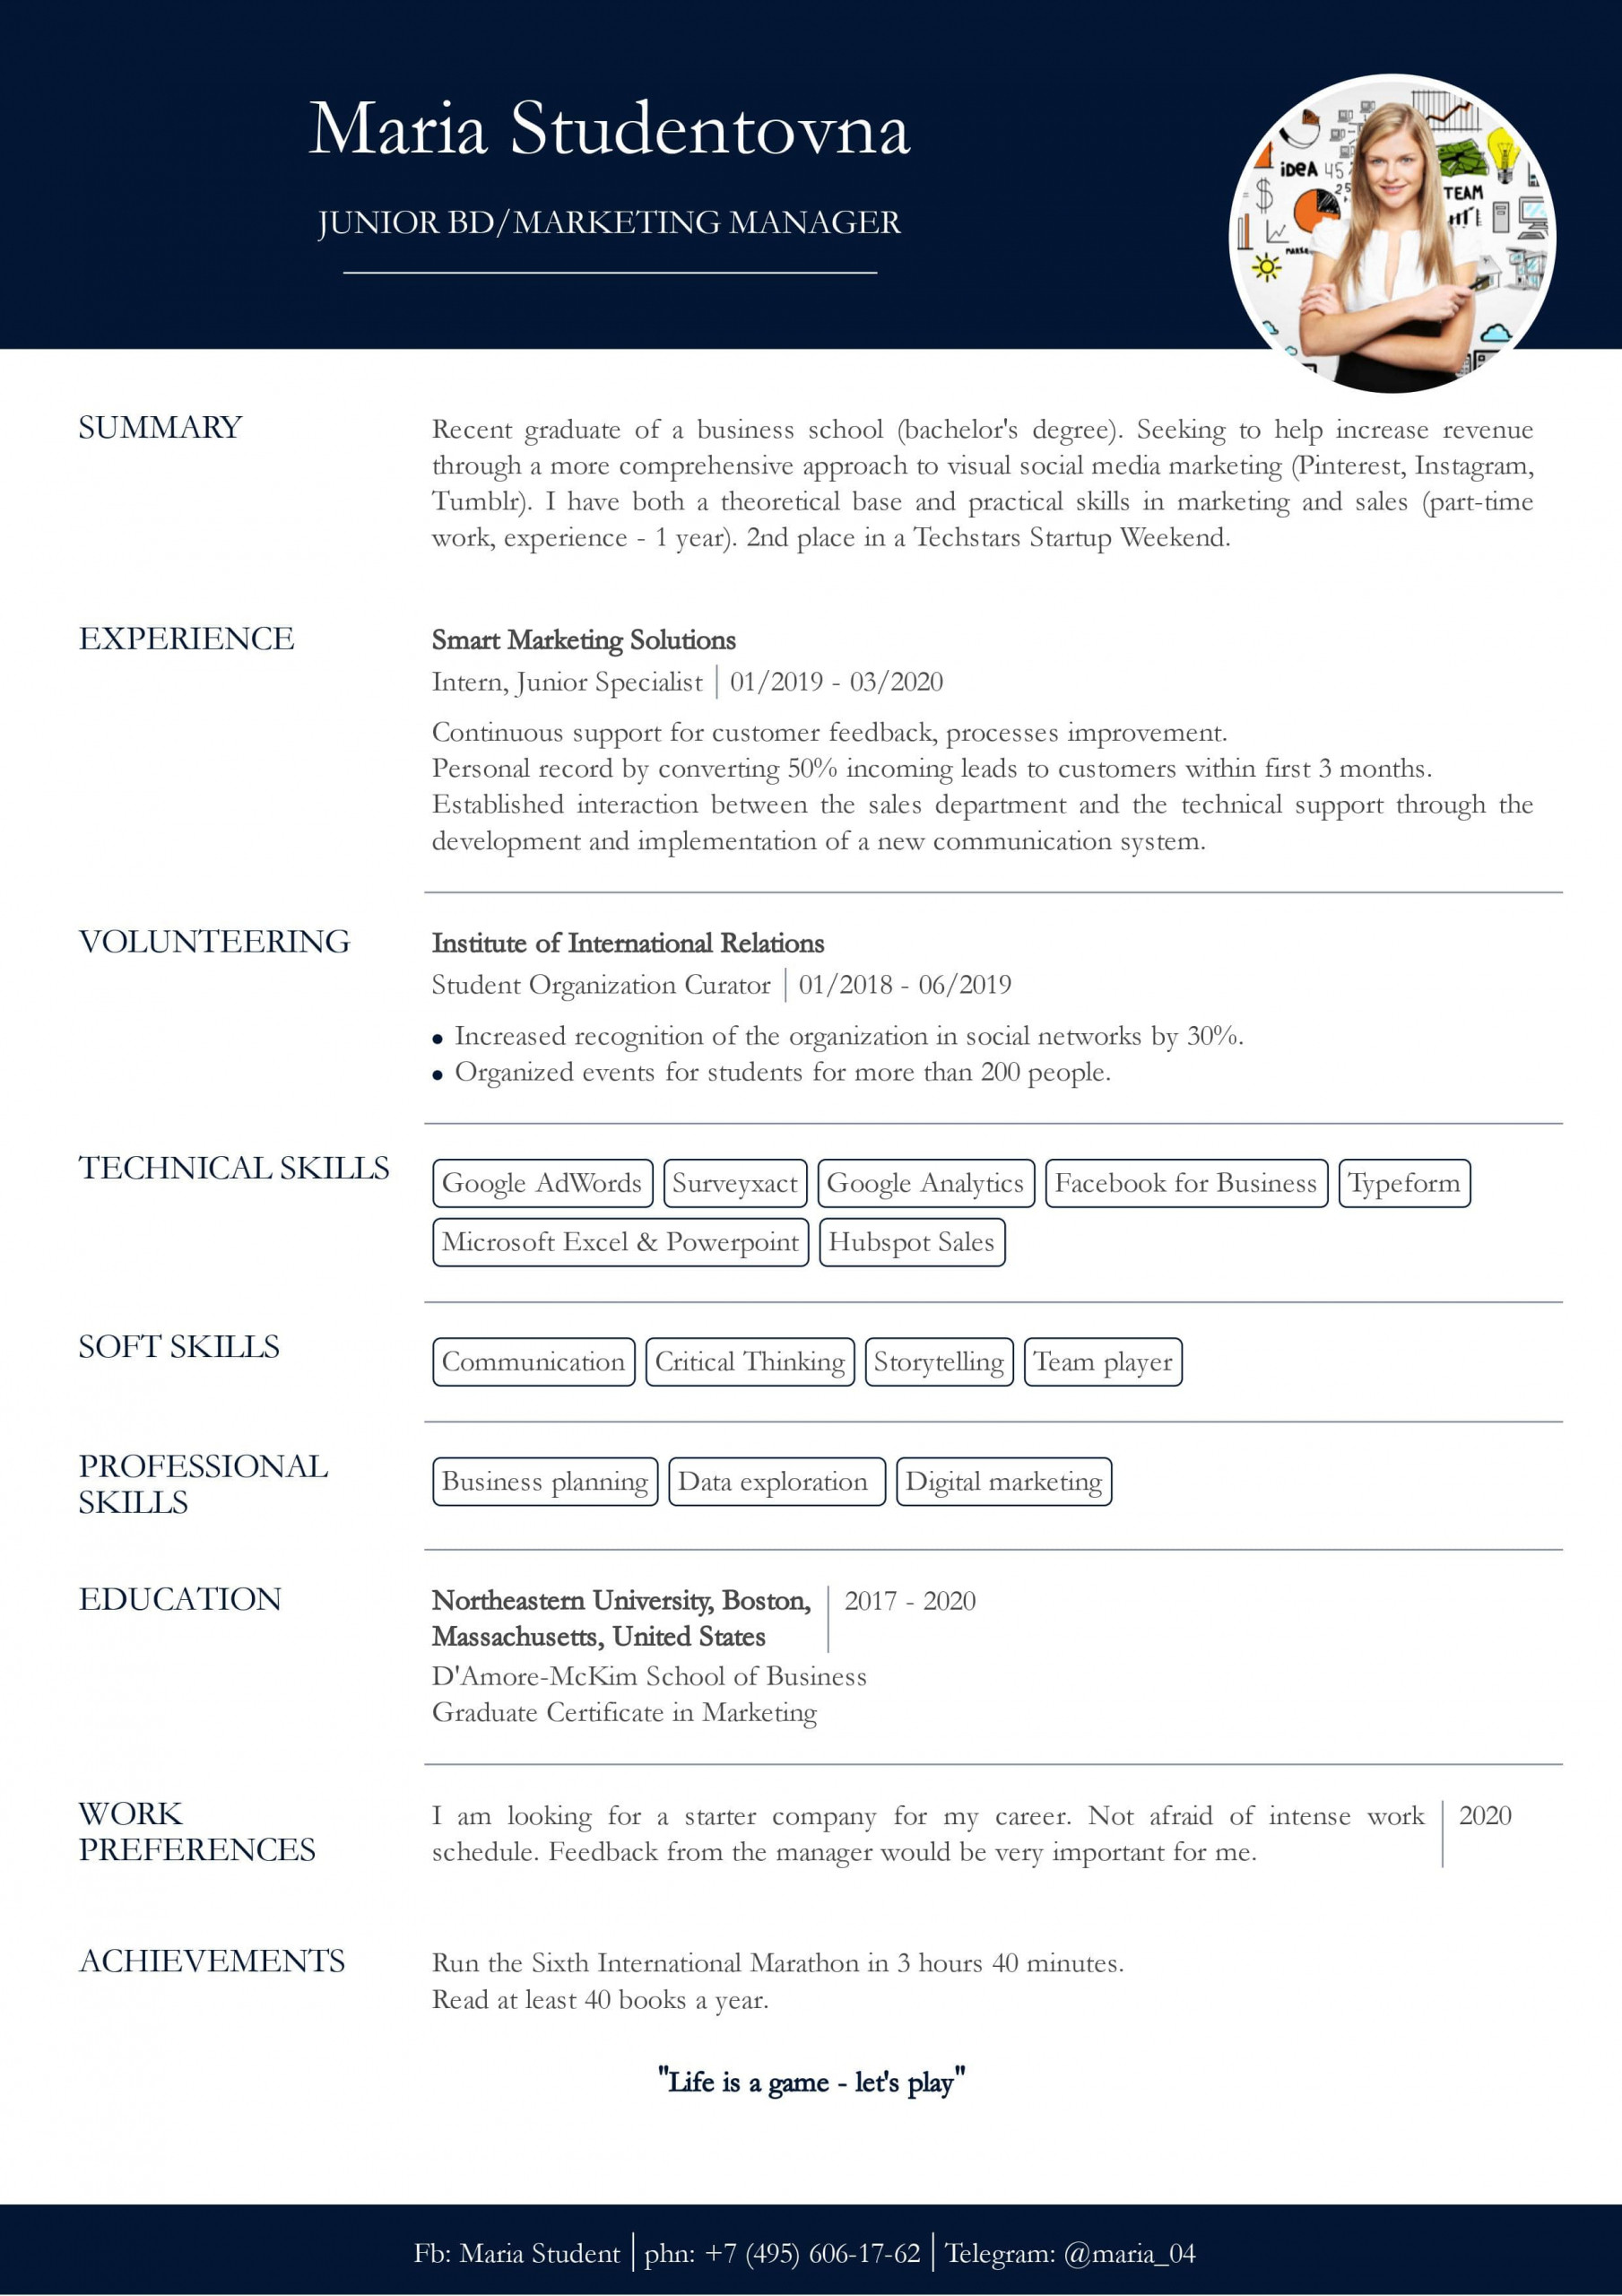 Resume for First Job No Experience Template Resume with No Work Experience. Sample for Students. – Cv2you Blog